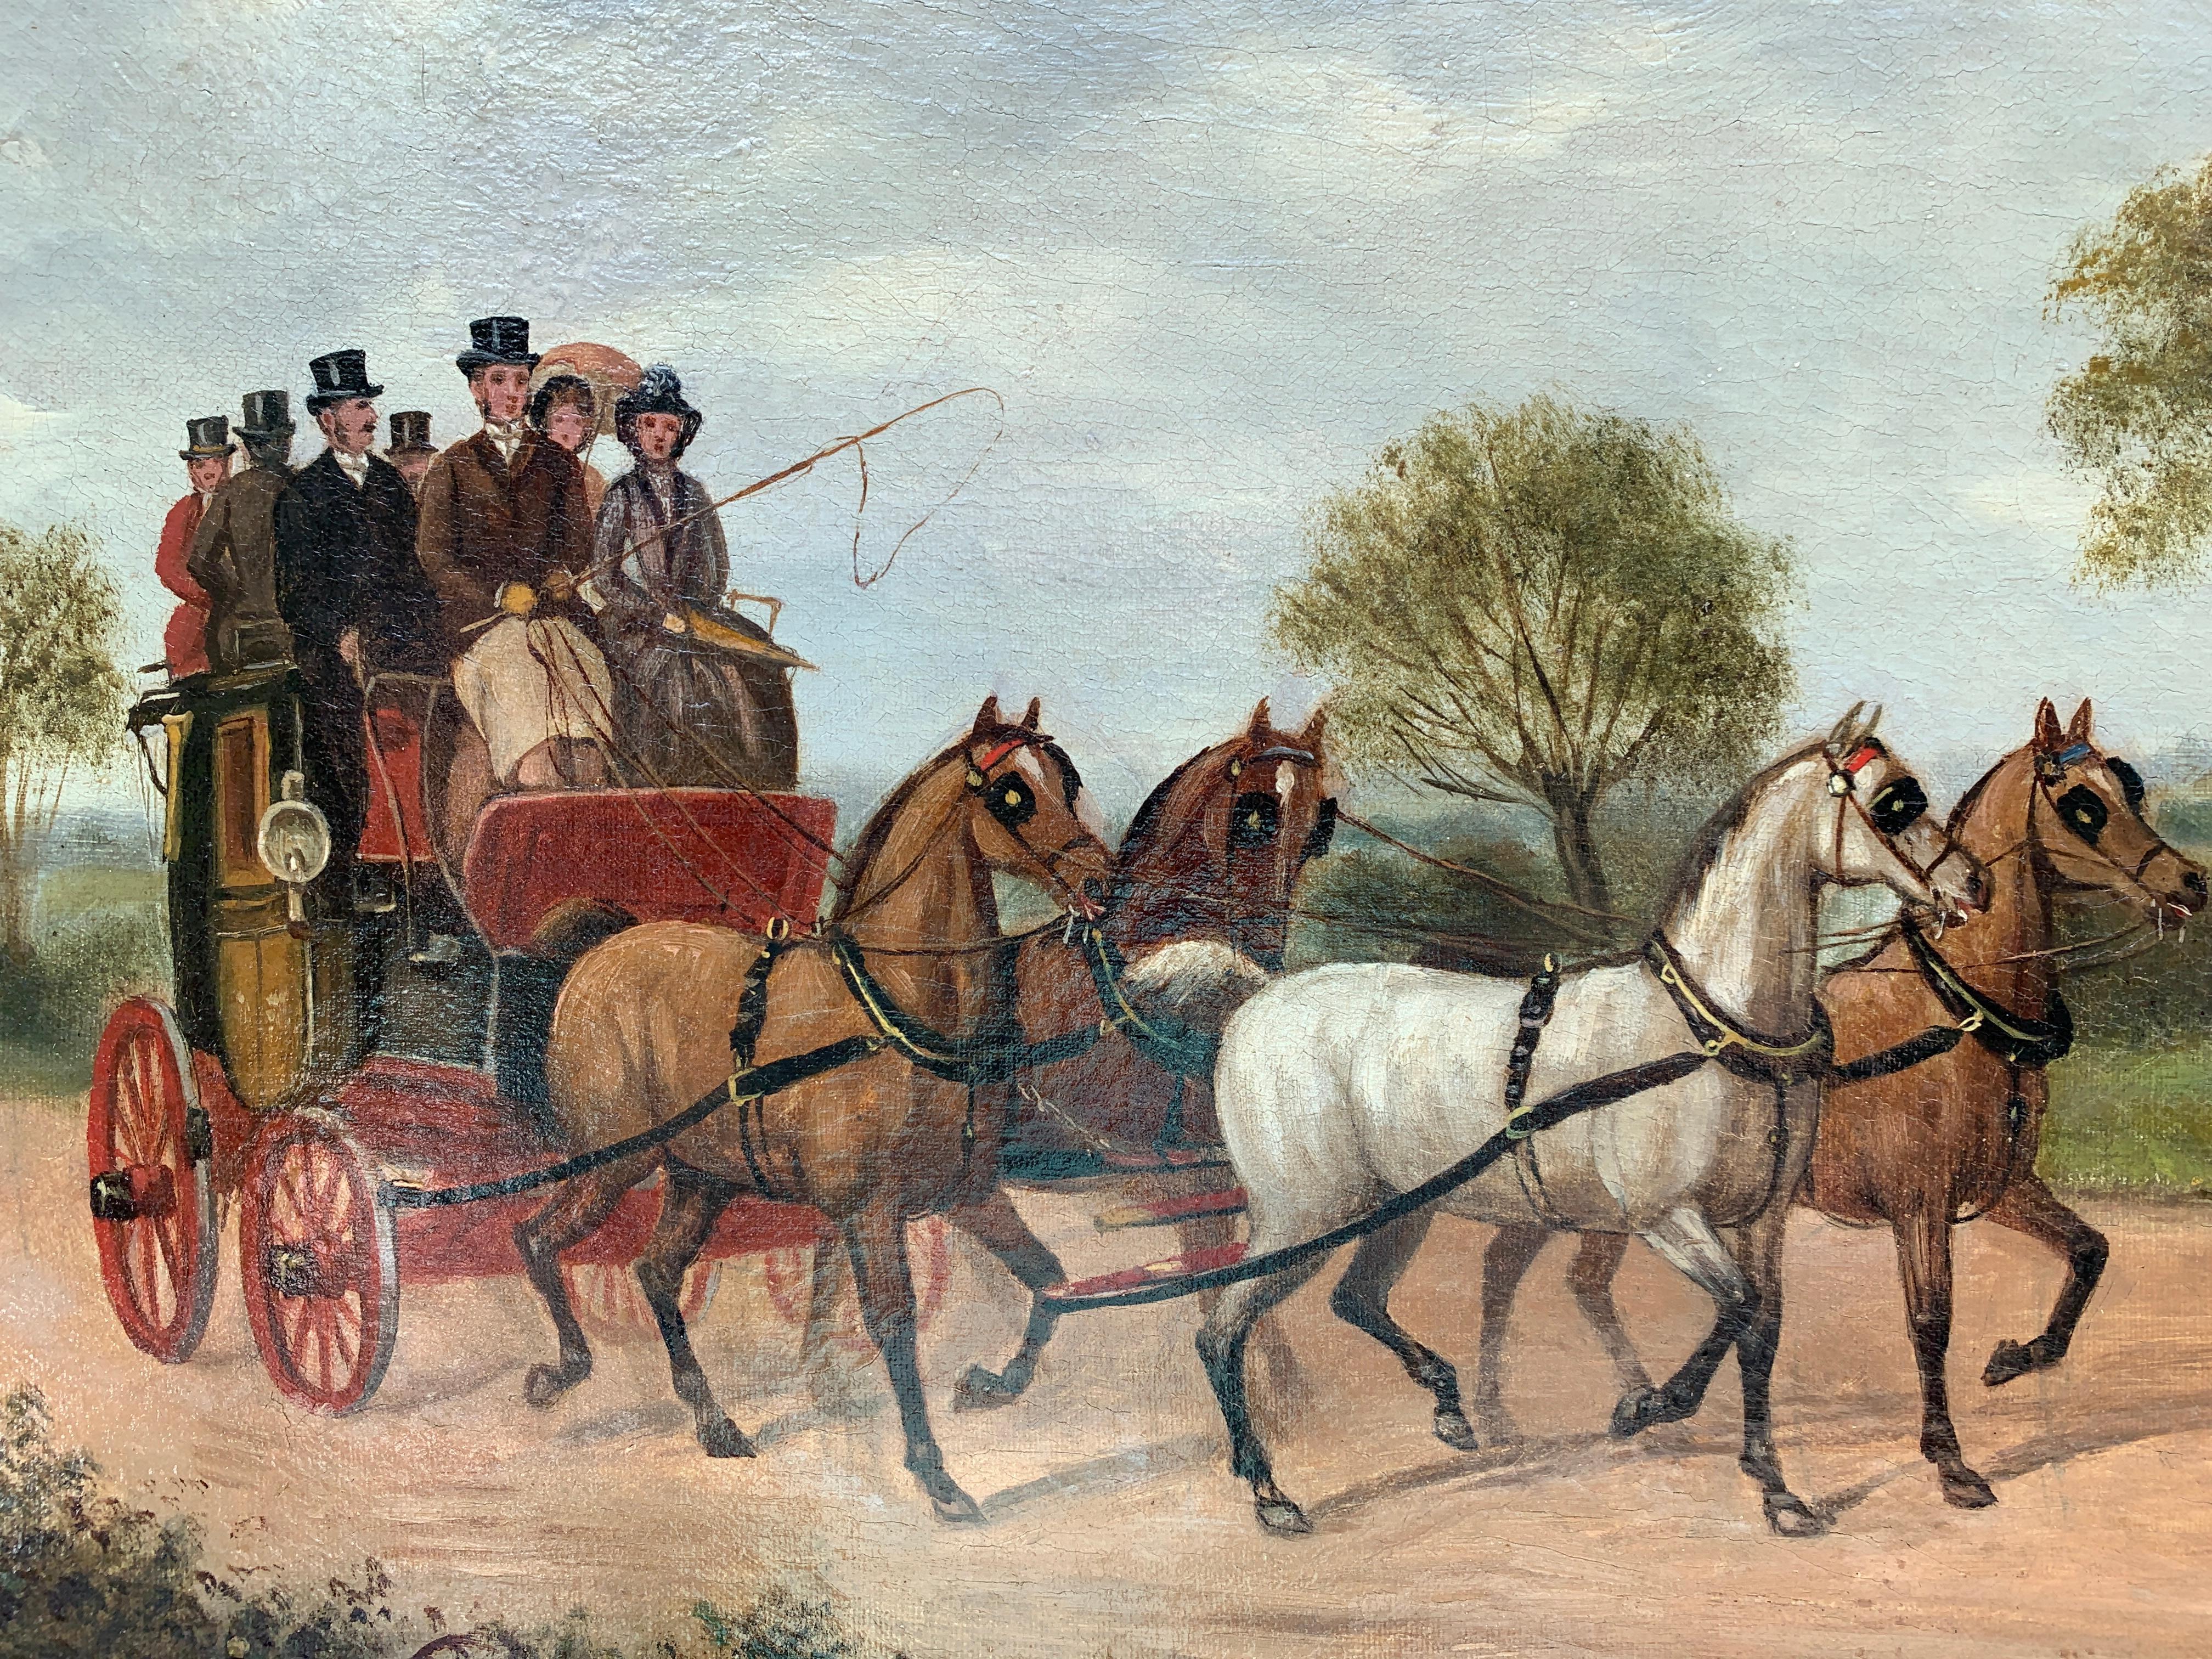 19th century Victorian English mail coach with horses in a landscape - Painting by Unknown